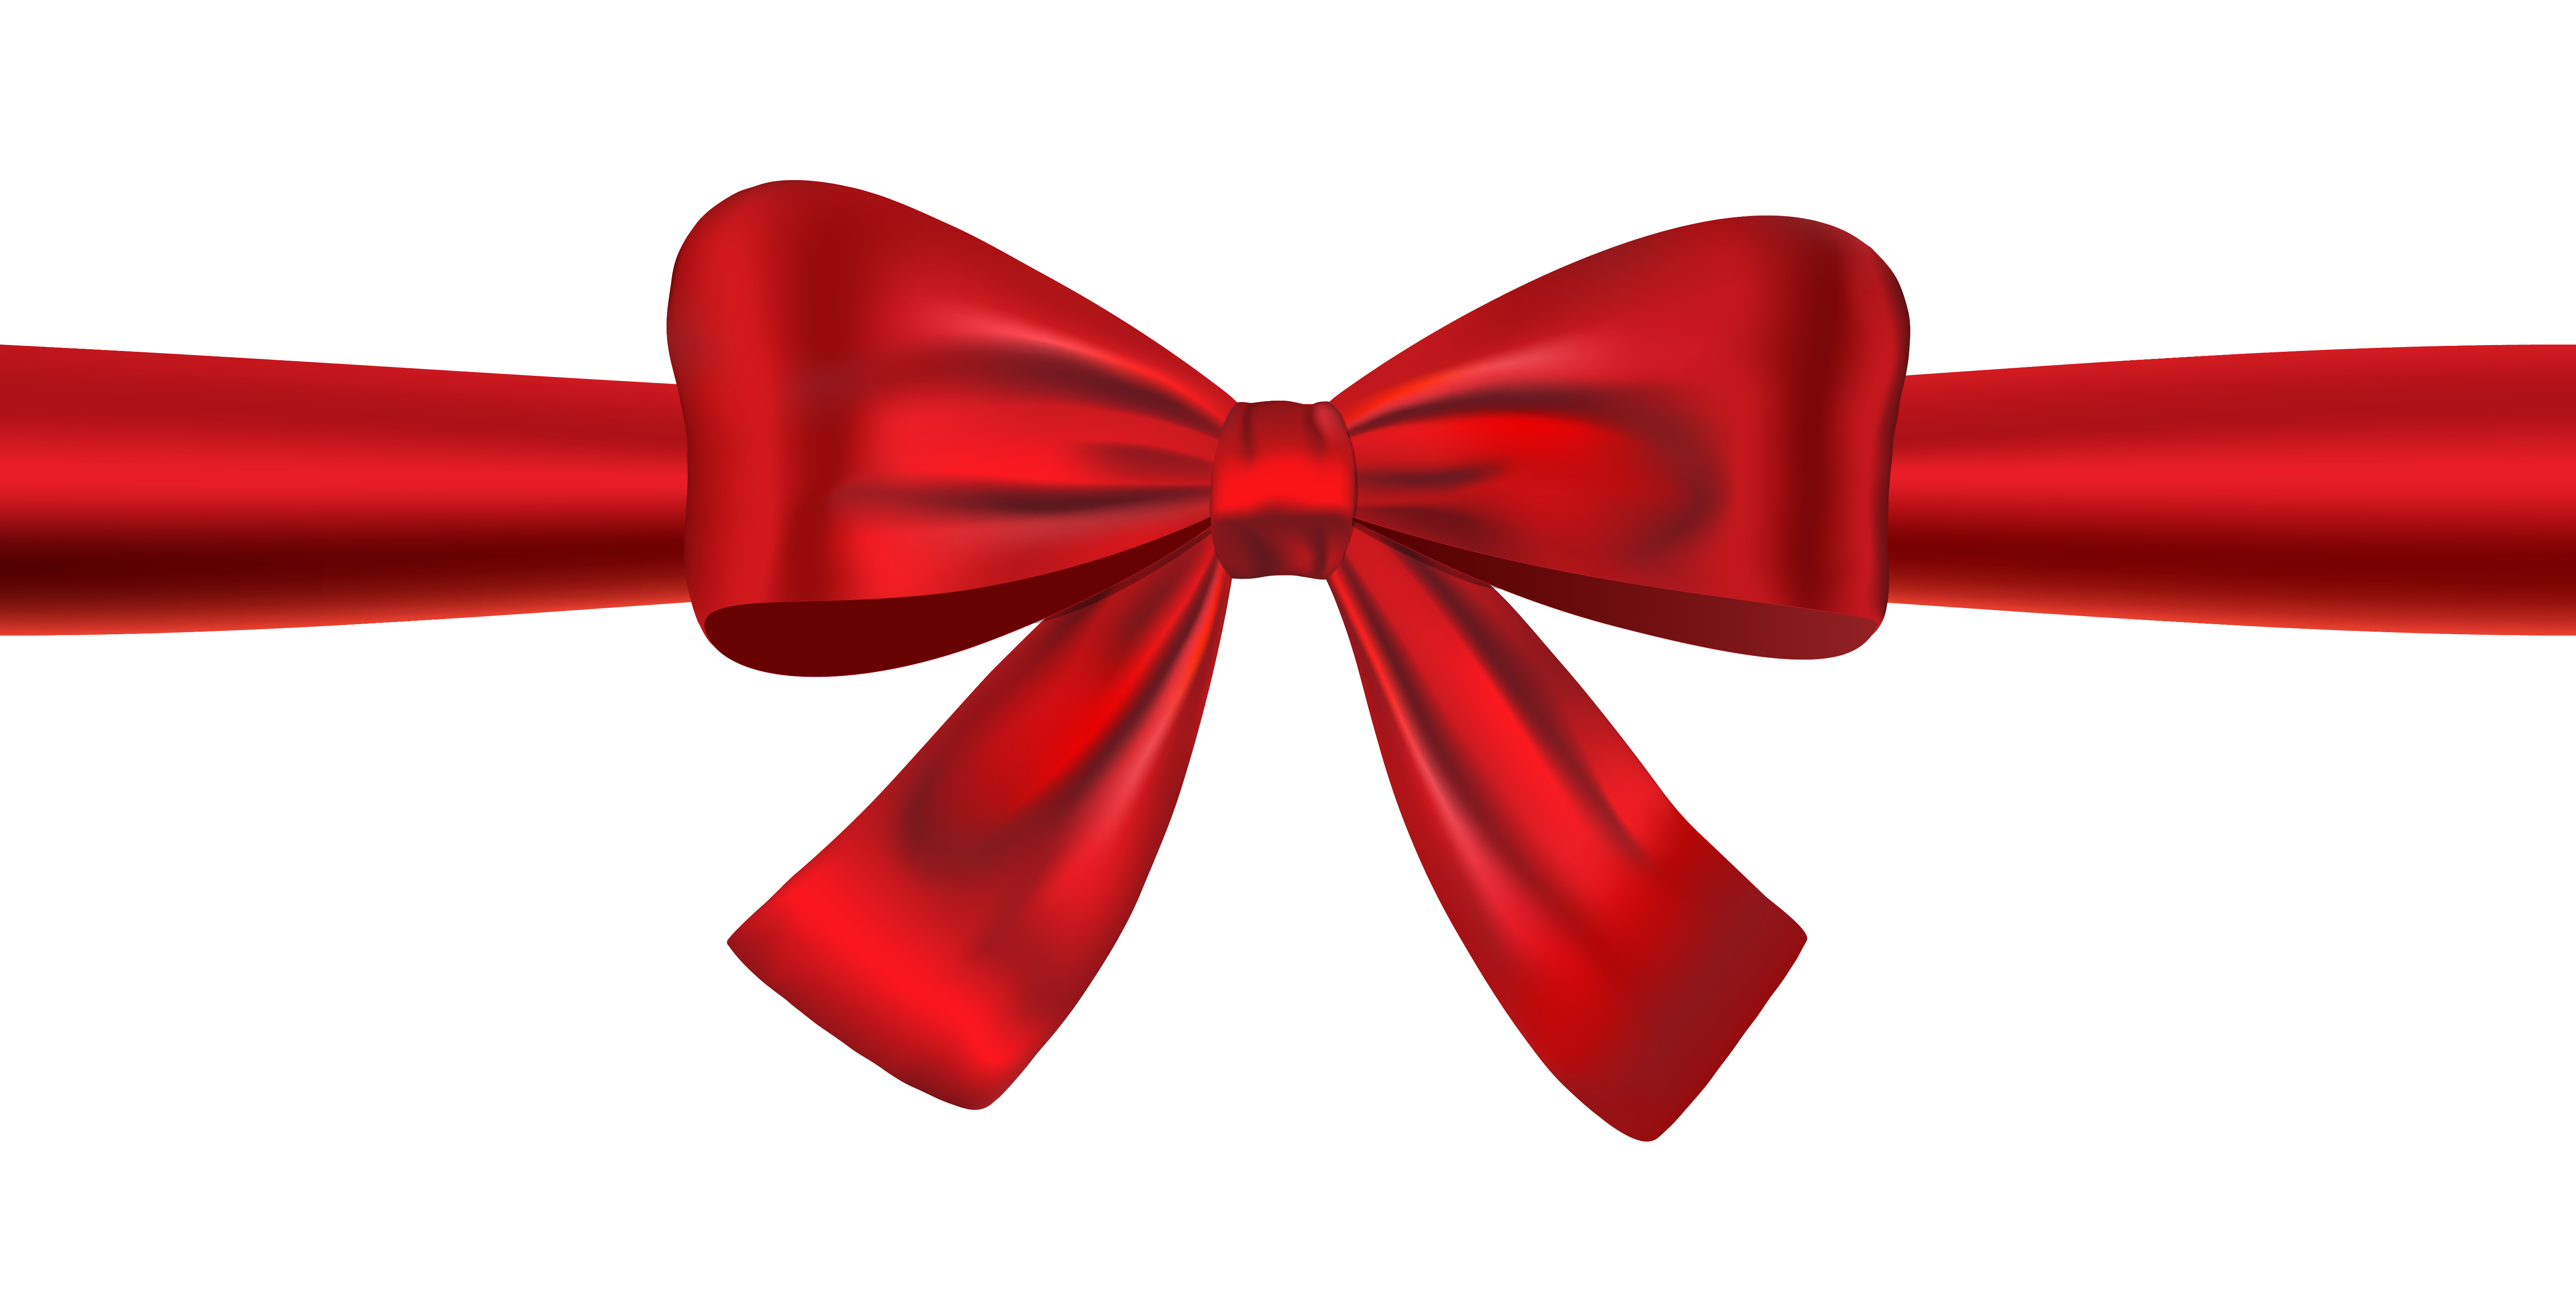 red banner ribbon png